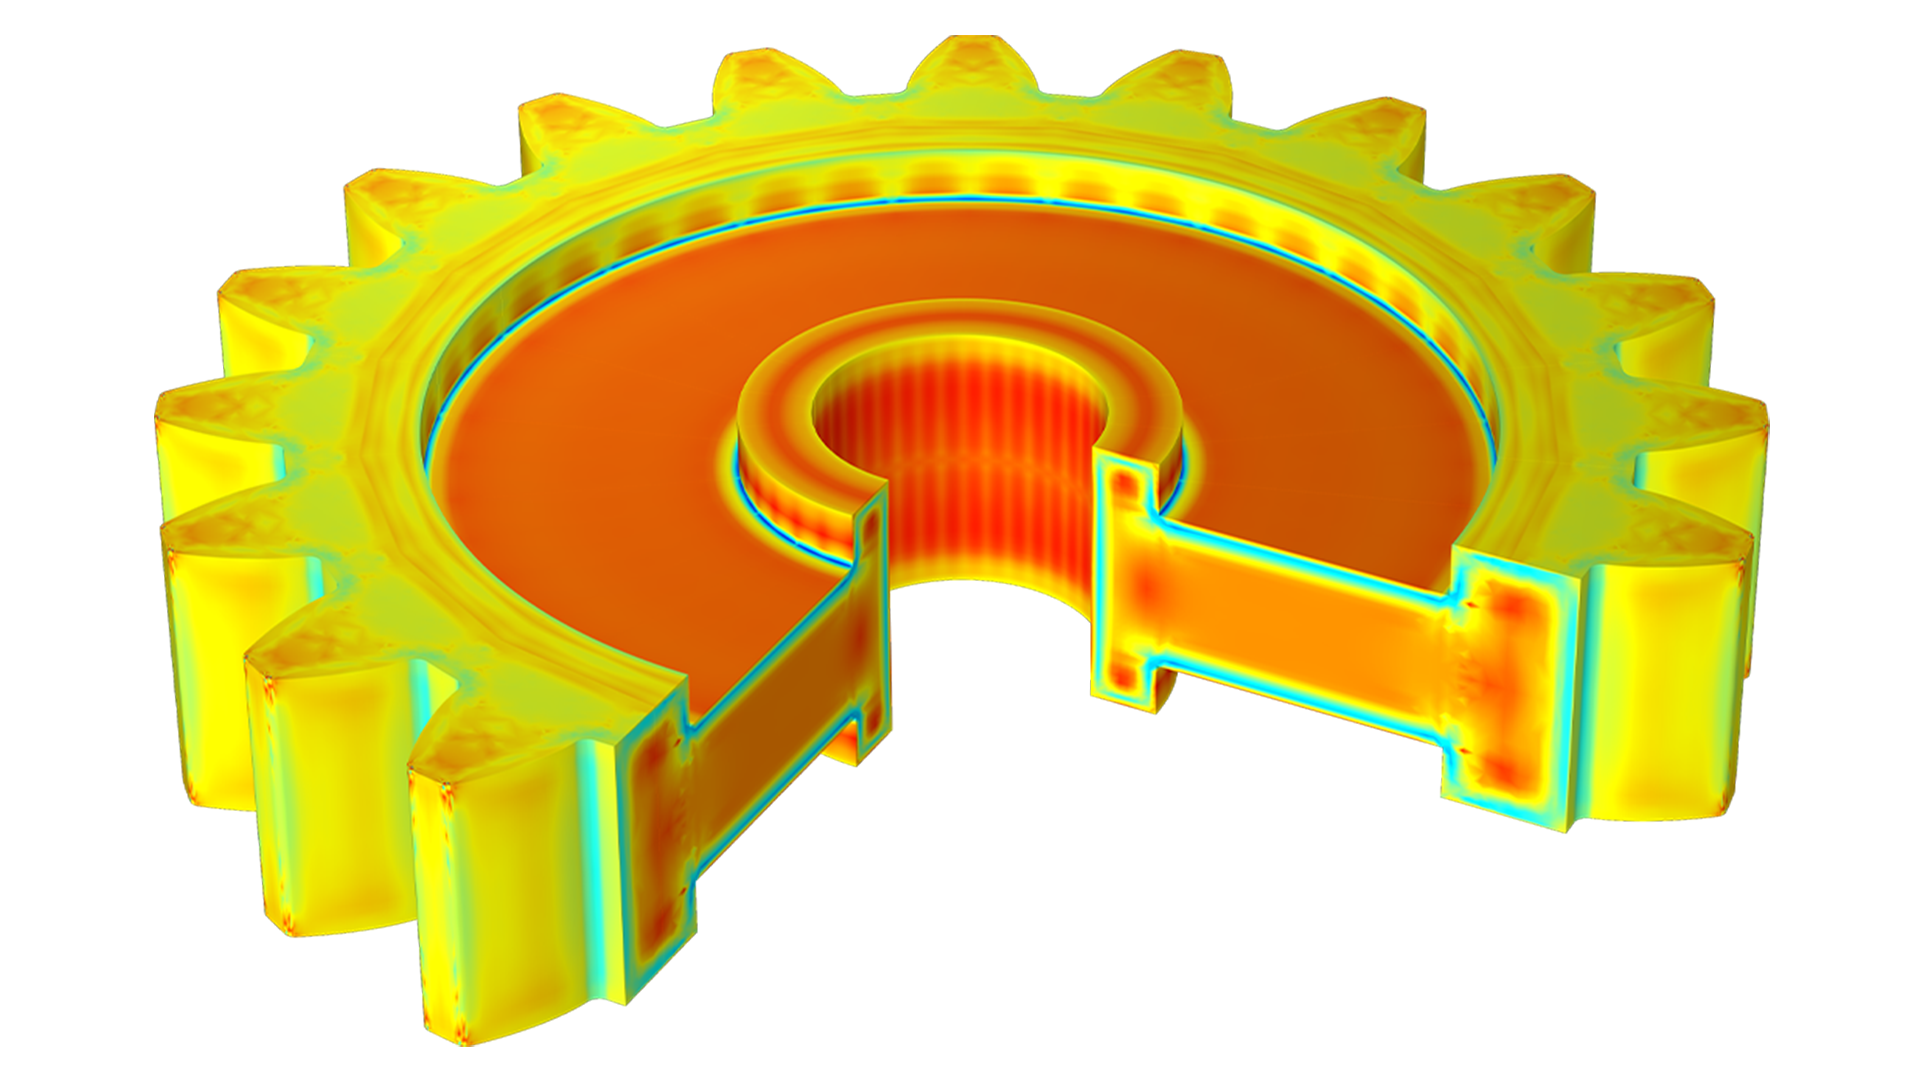 A model of a spur gear visualized in orange, yellow, and green, where a slice is missing, revealing the inside of the gear.